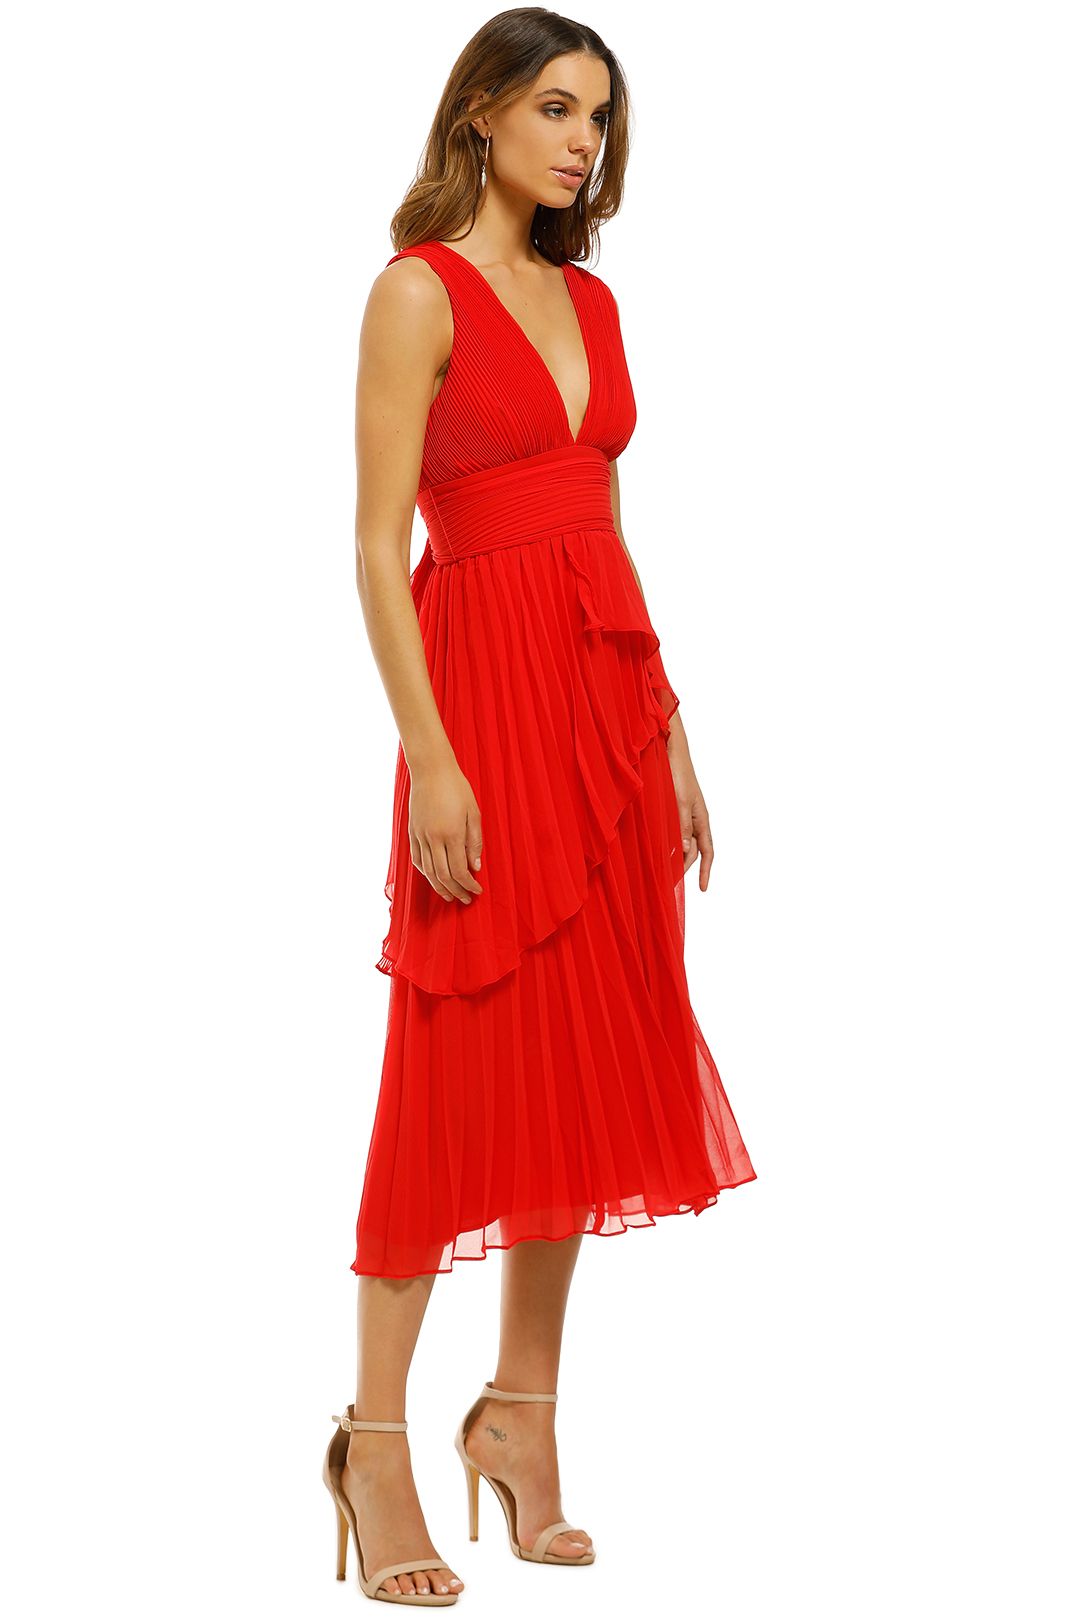 Talulah-Sugar-and-Spice-Midi-Dress-Red-Side